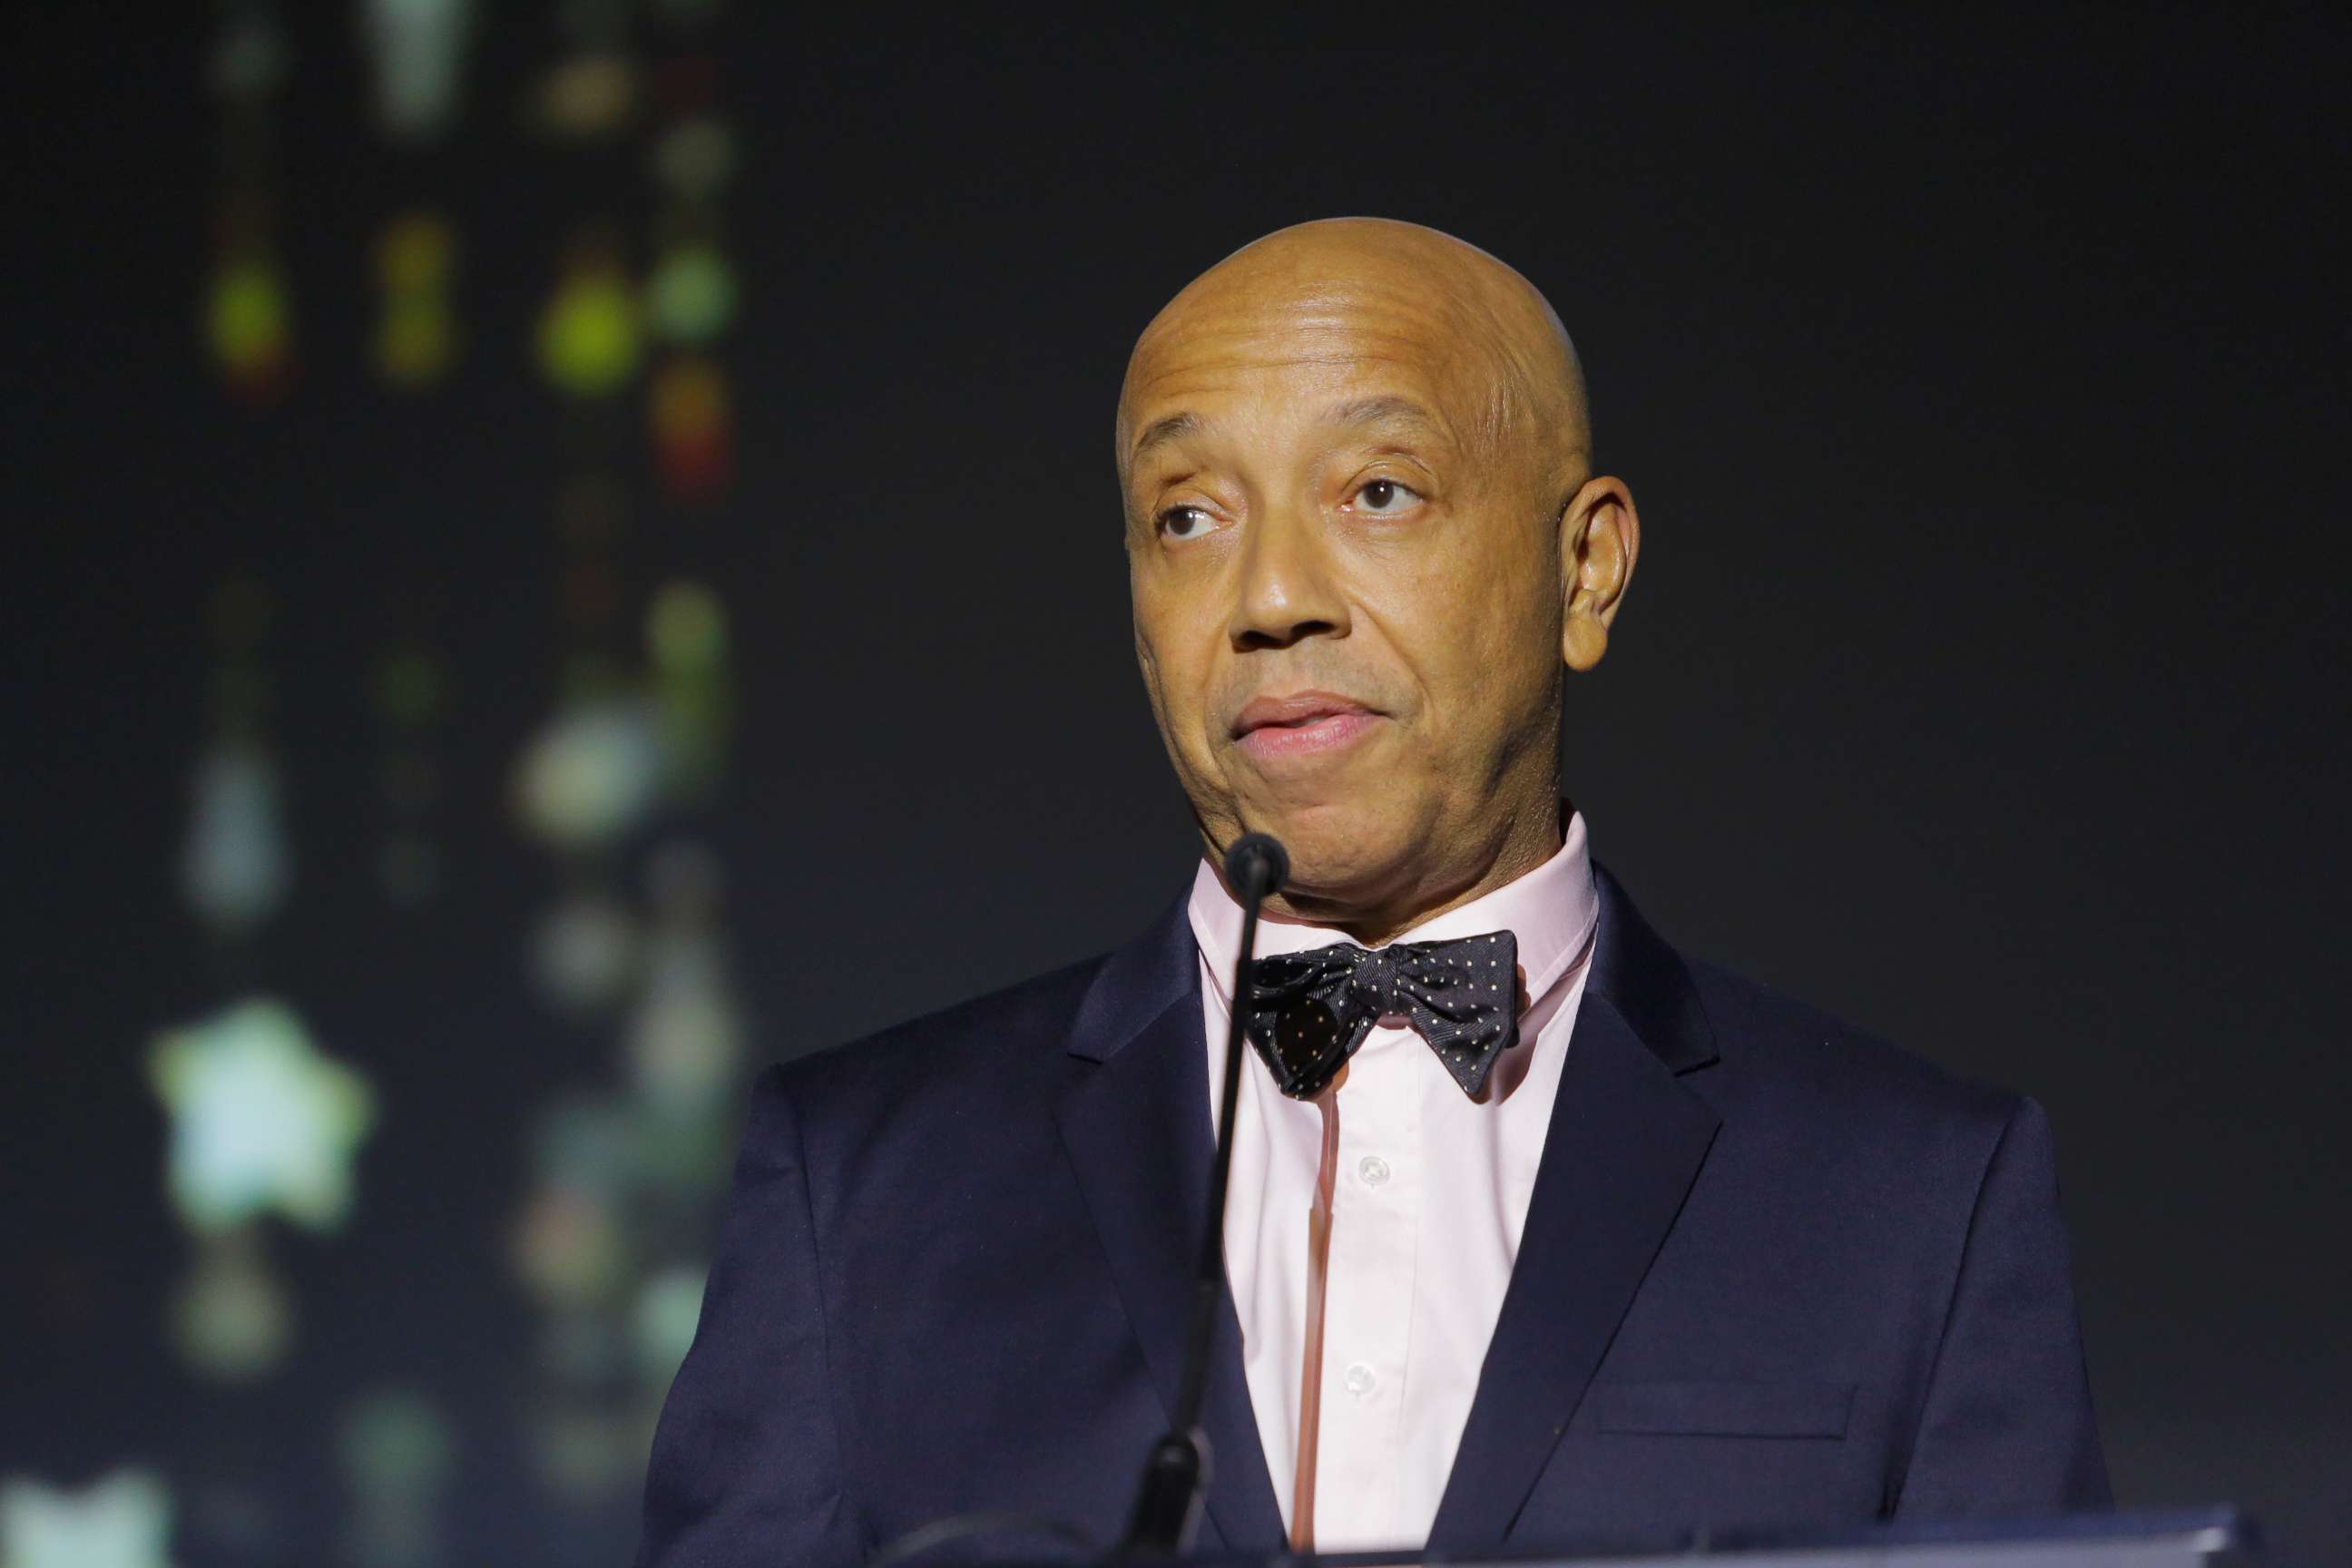 PHOTO: Music producer Russell Simmons speaks onstage at the 2017 Make a Wish Gala, Nov. 9, 2017, in Los Angeles.